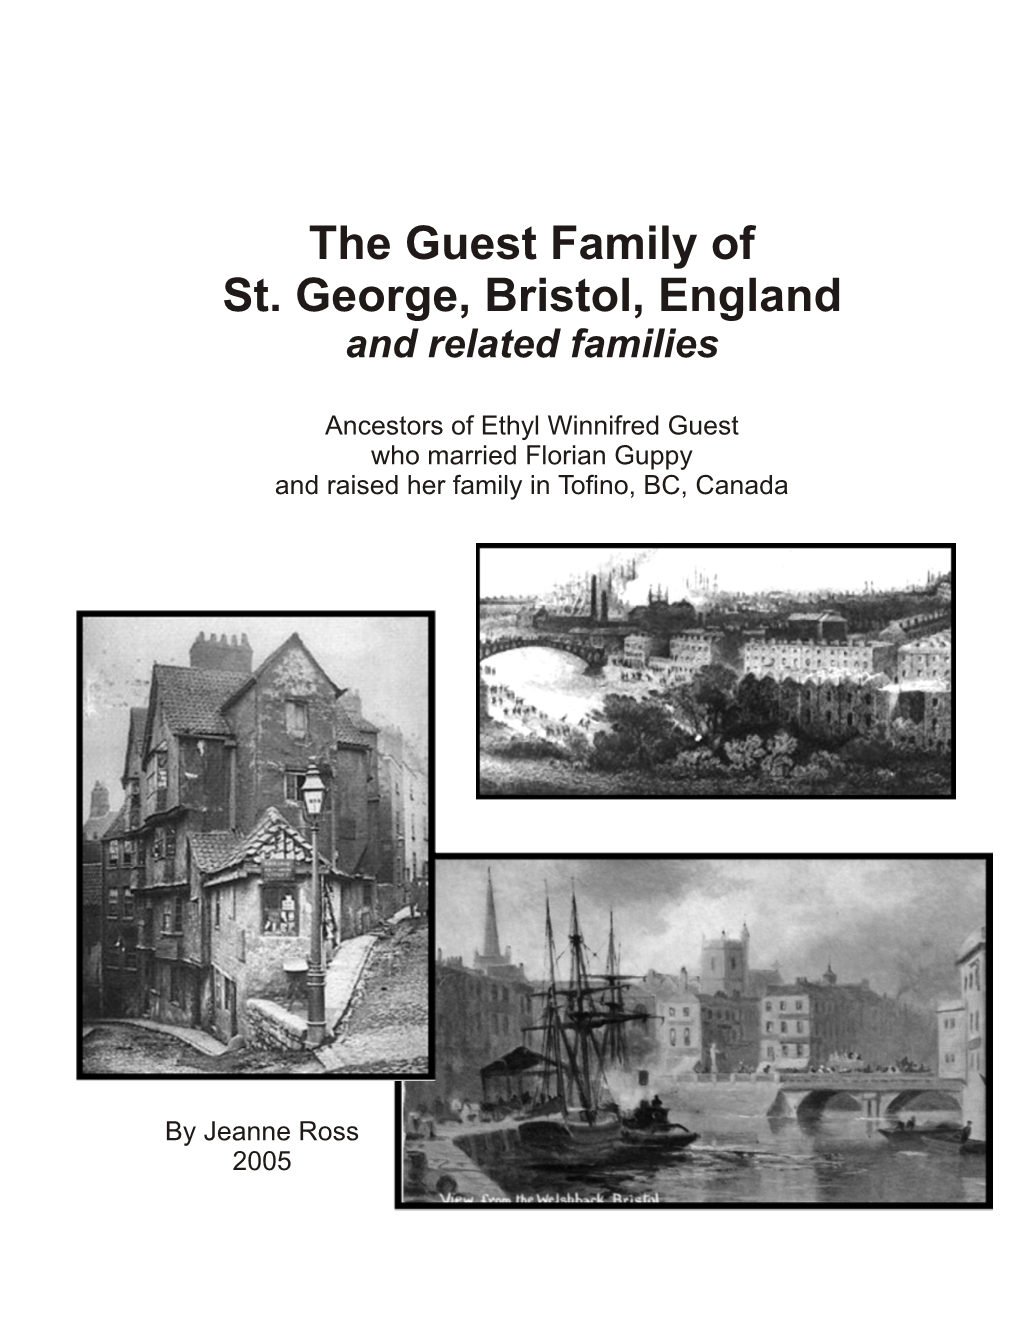 The Guest Family of St. George, Bristol, England and Related Families